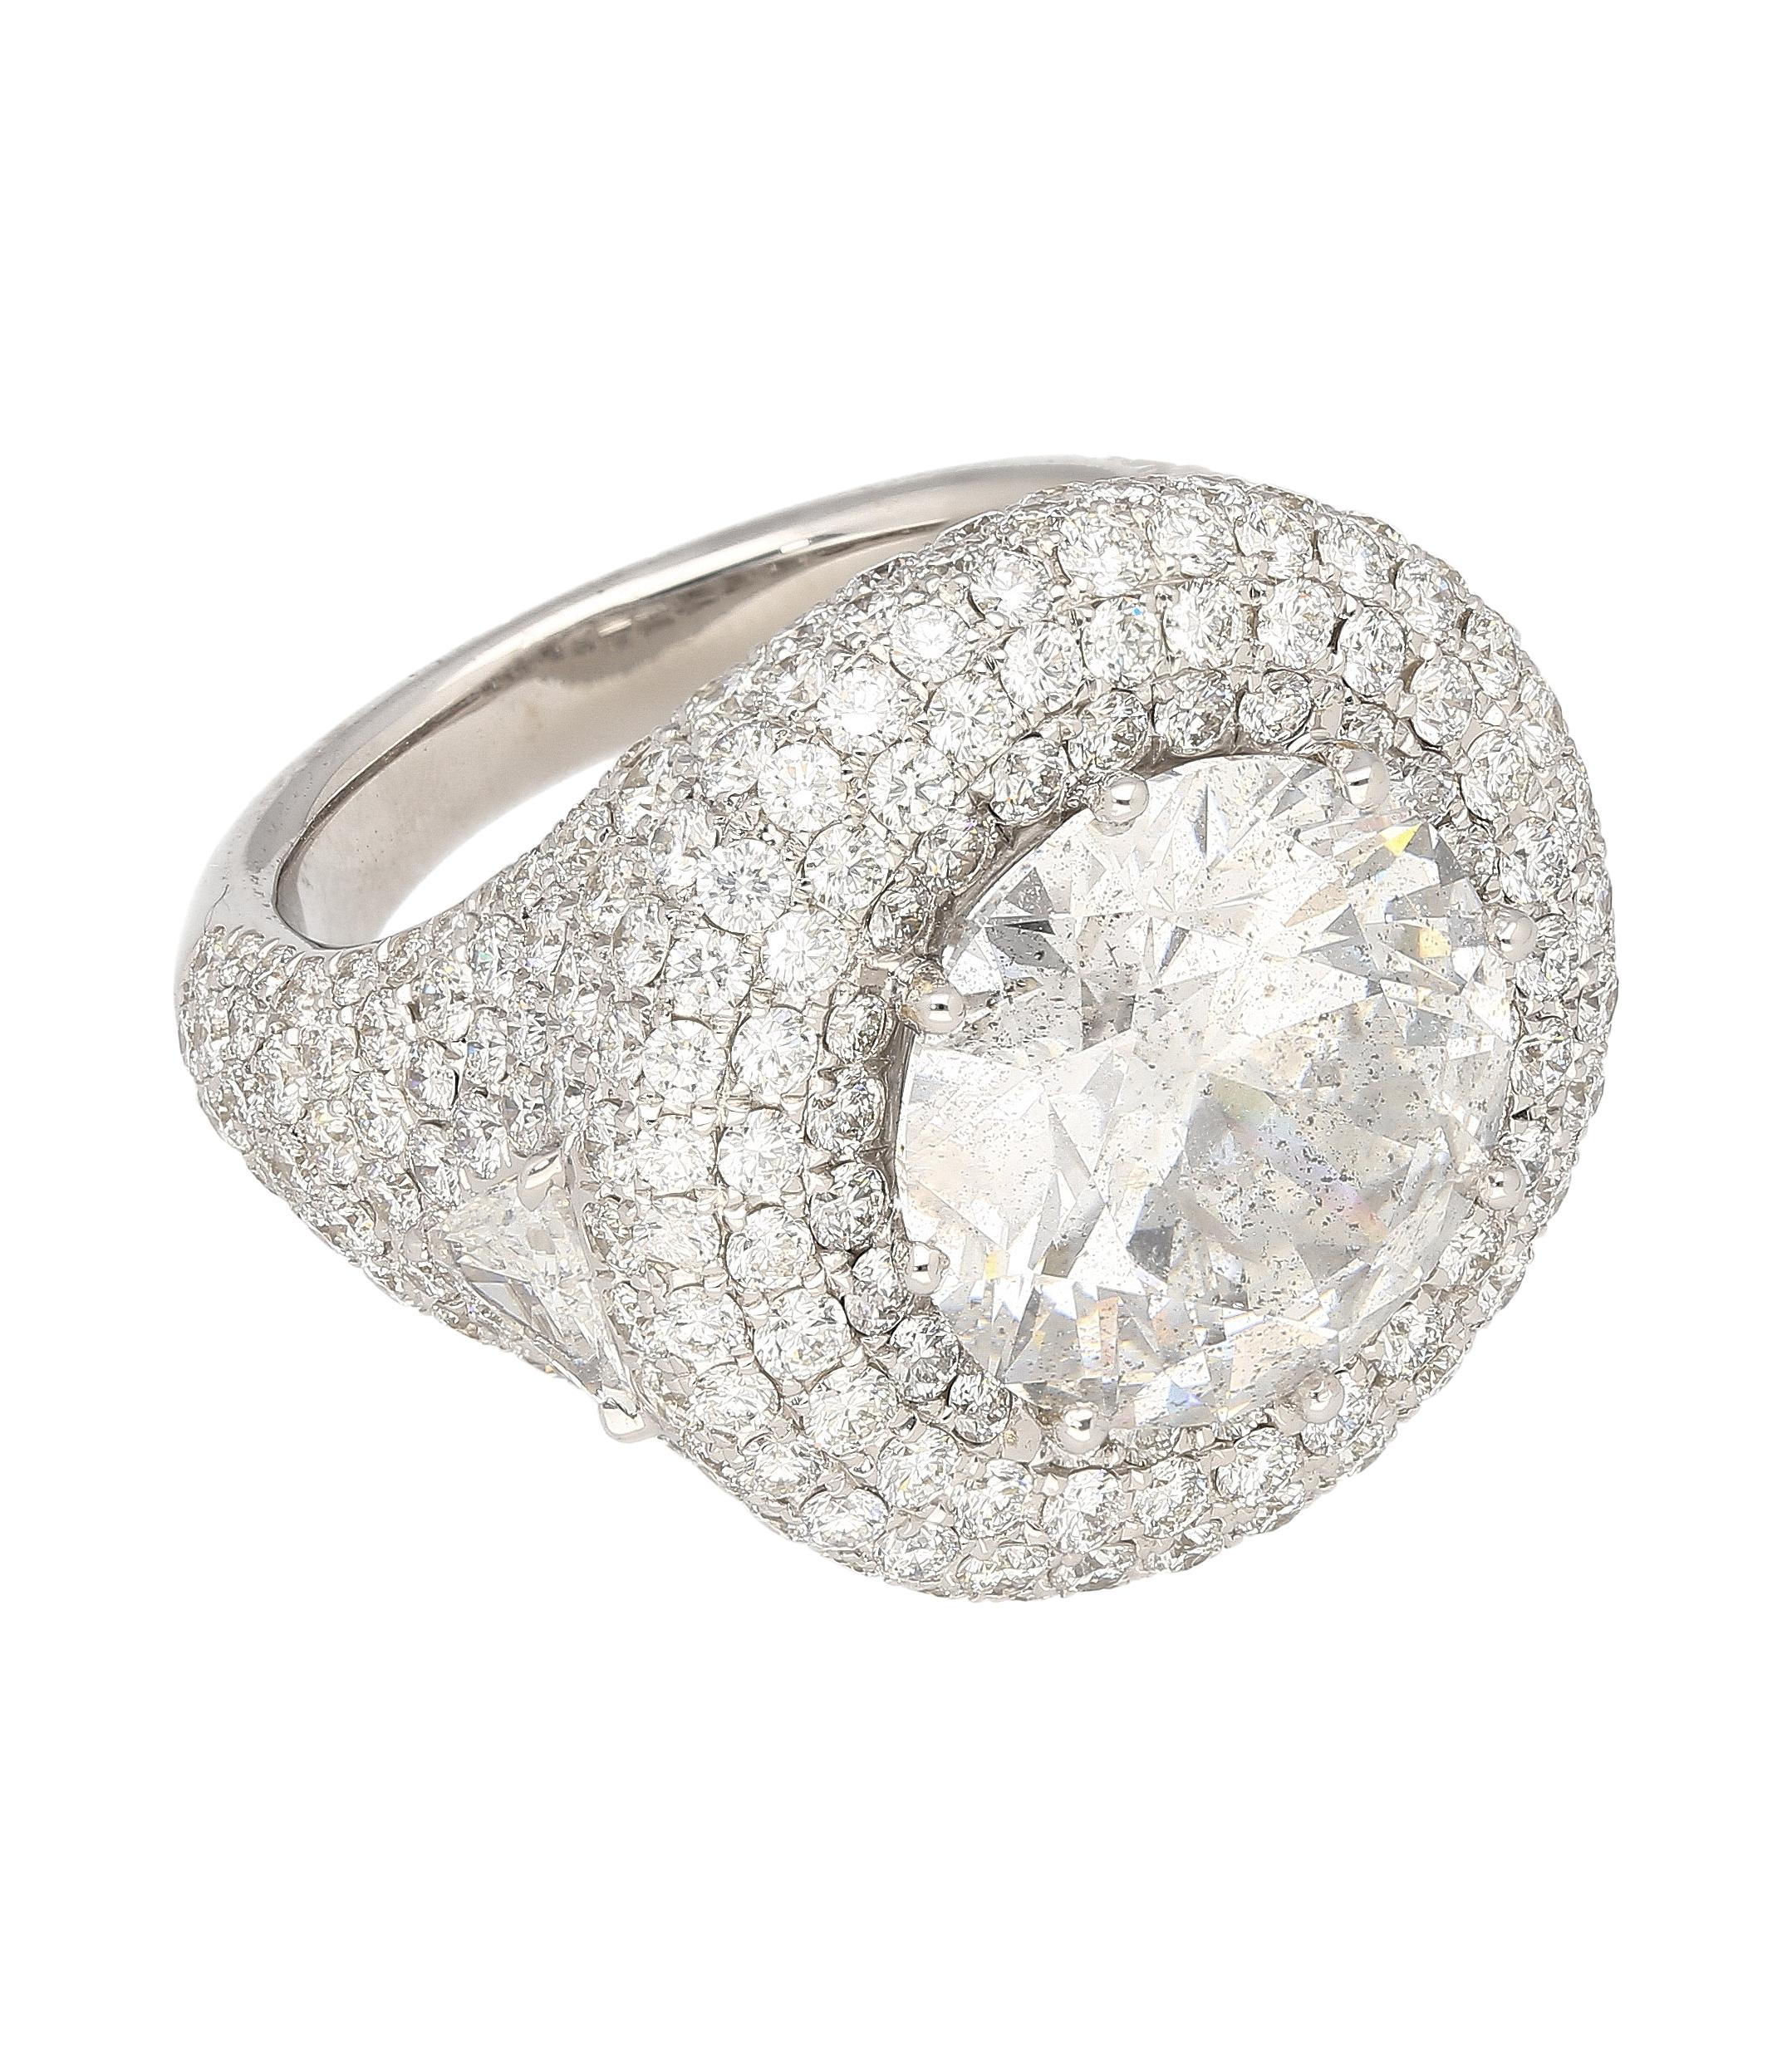 Art Deco 7.71 Carat Round Cut Natural Diamond Pave Cluster Ring in 18K White Gold For Sale